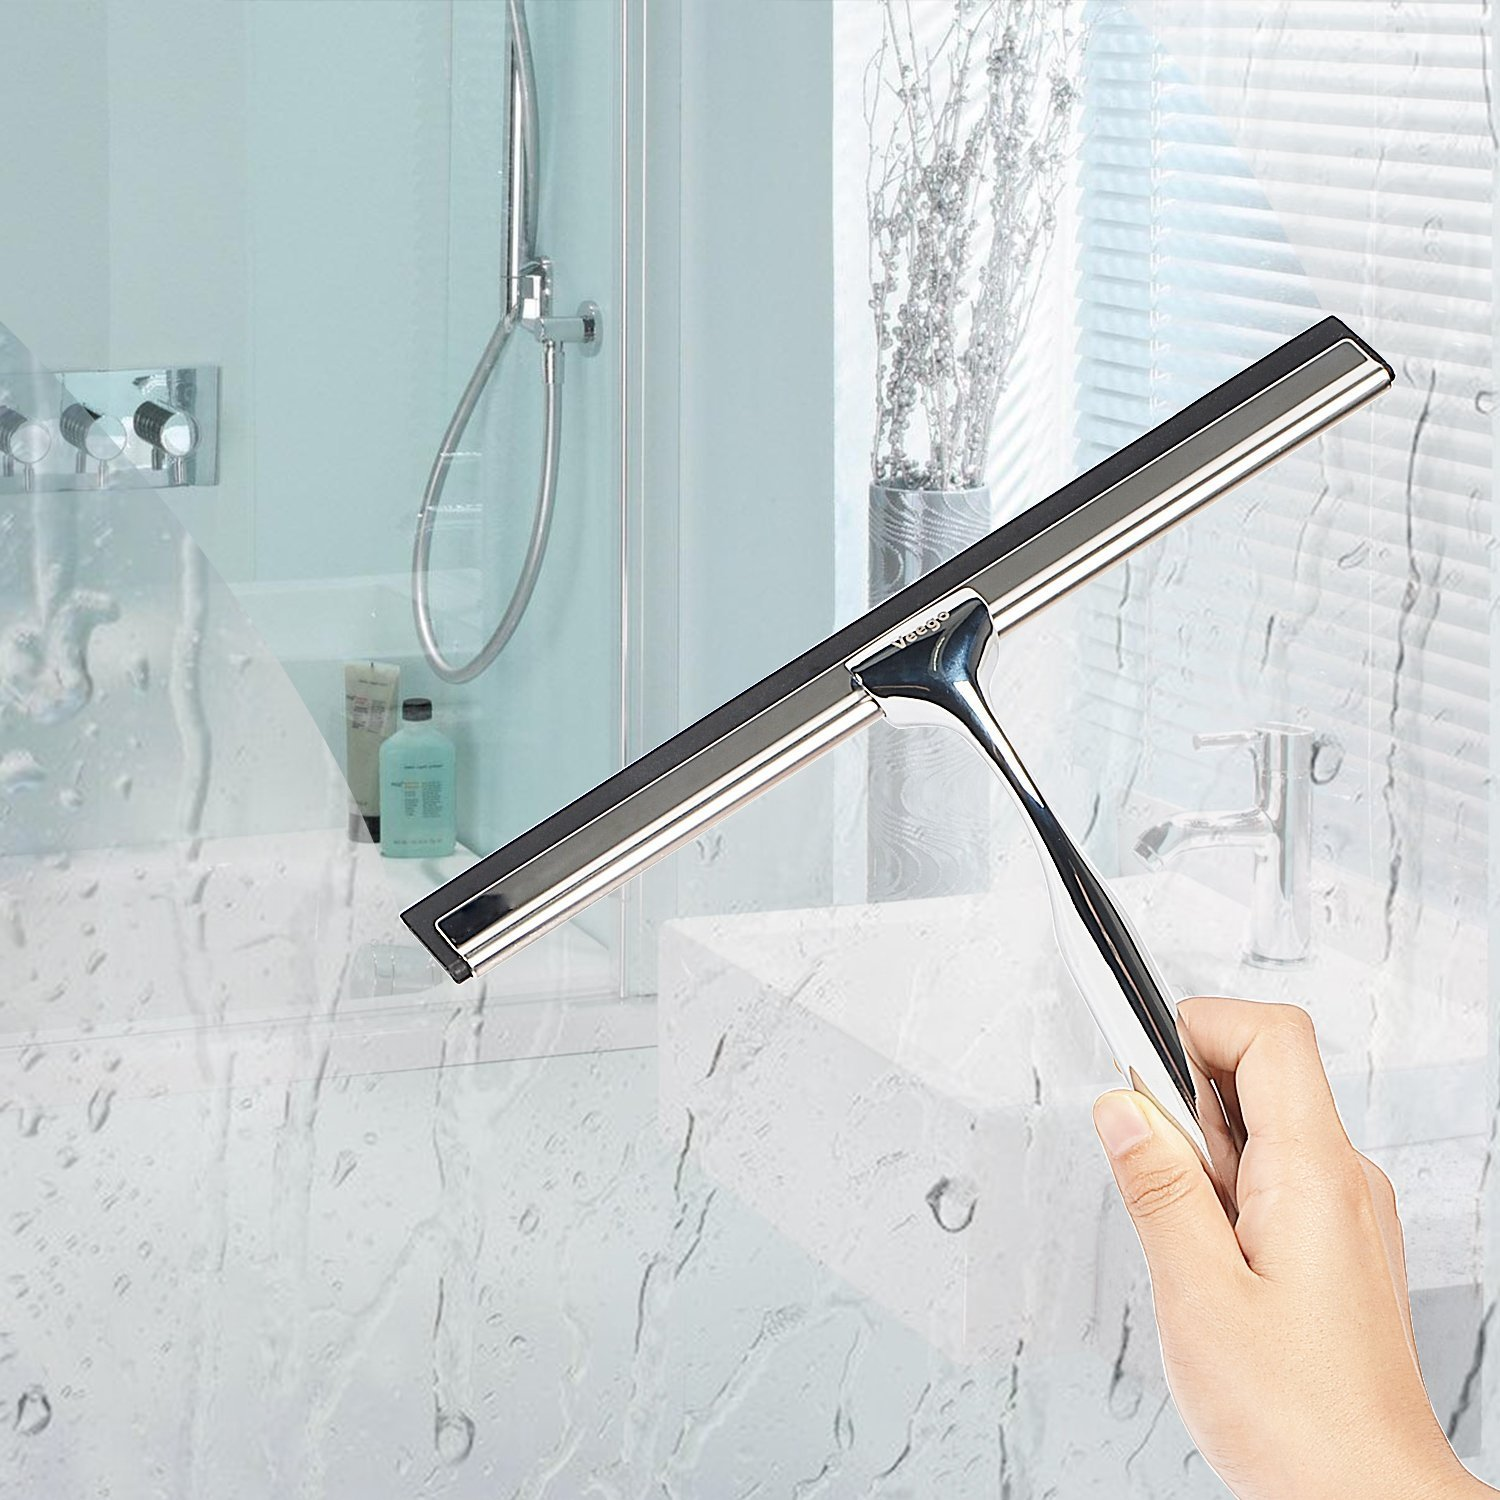 Amazon: Shower Window Squeegee ONLY $9.99!